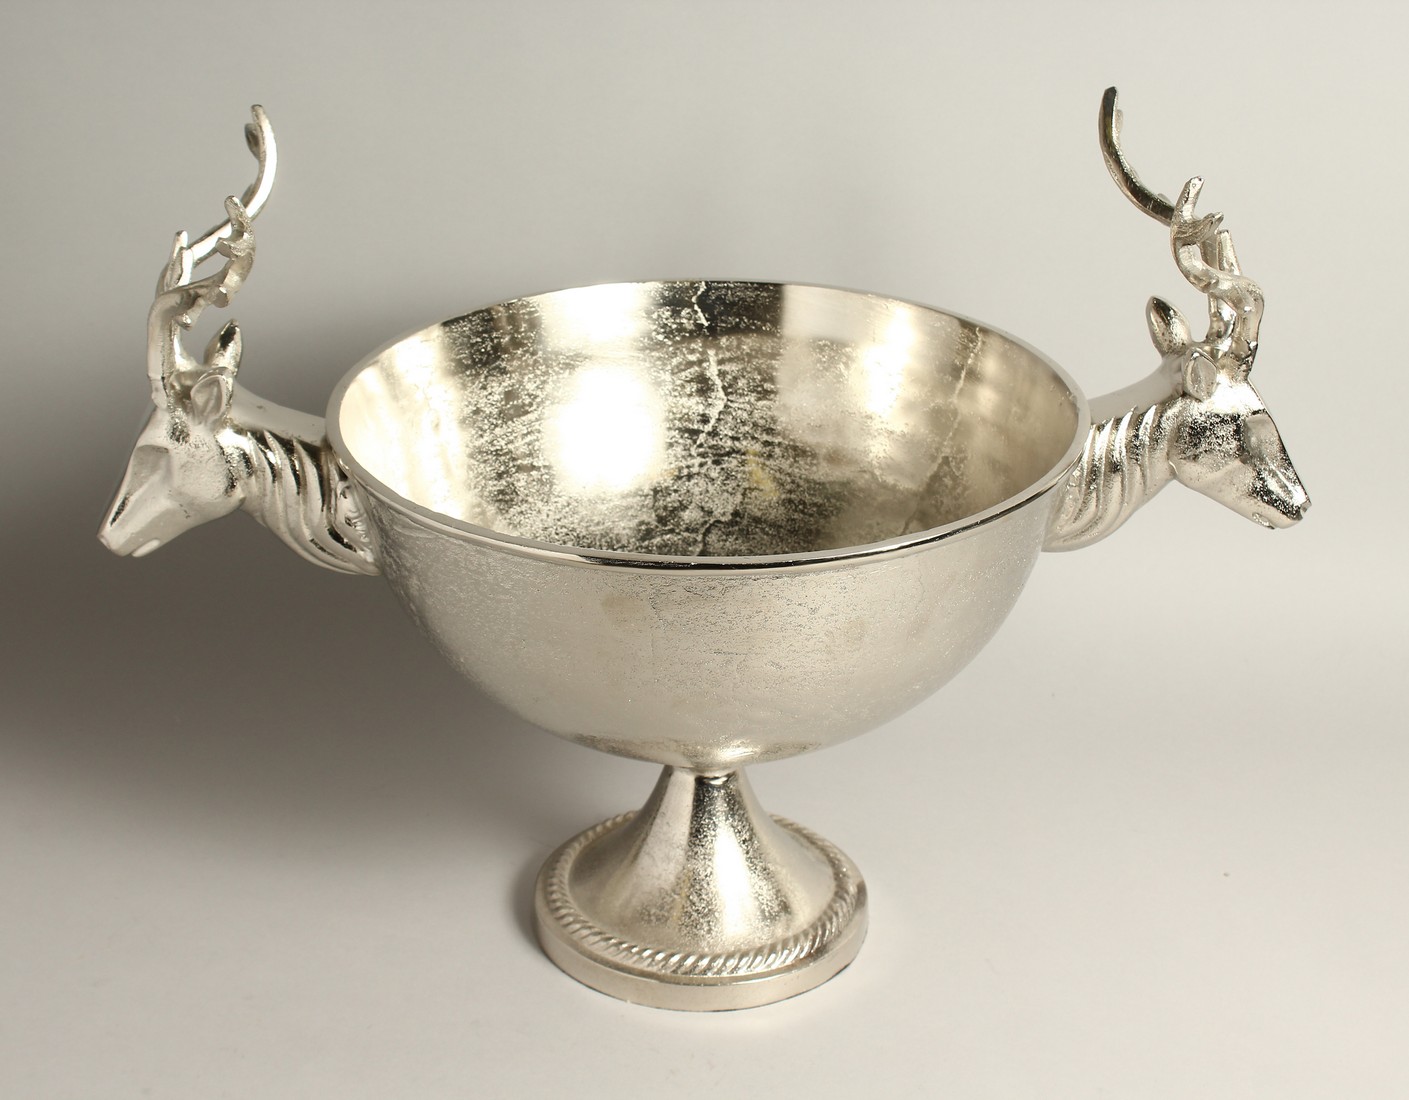 A CIRCULAR PEDESTAL WINE COOLER with stag handles 13ins diameter.